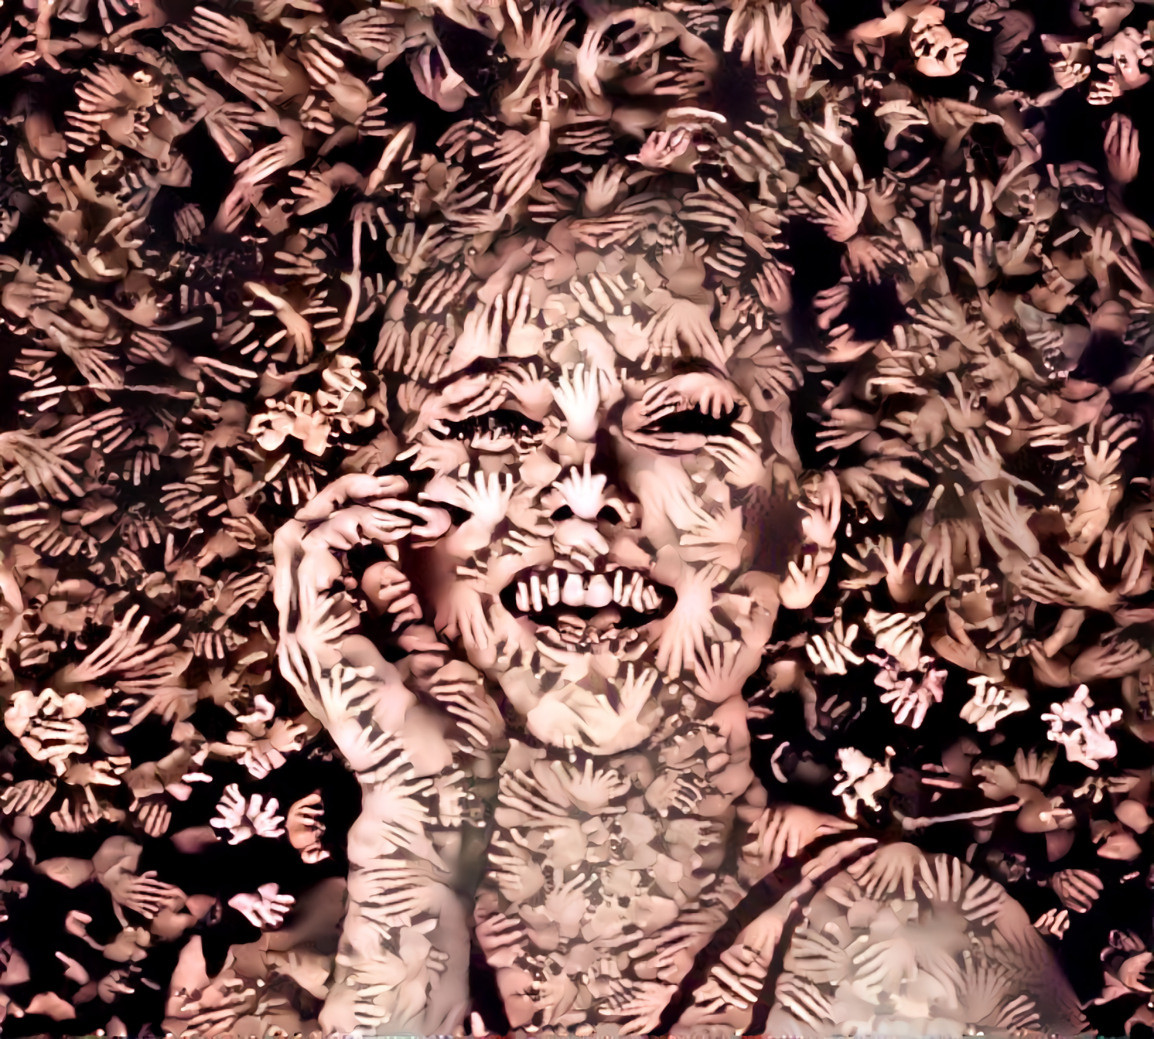 Face of Hands 2 - Style Transfer Art